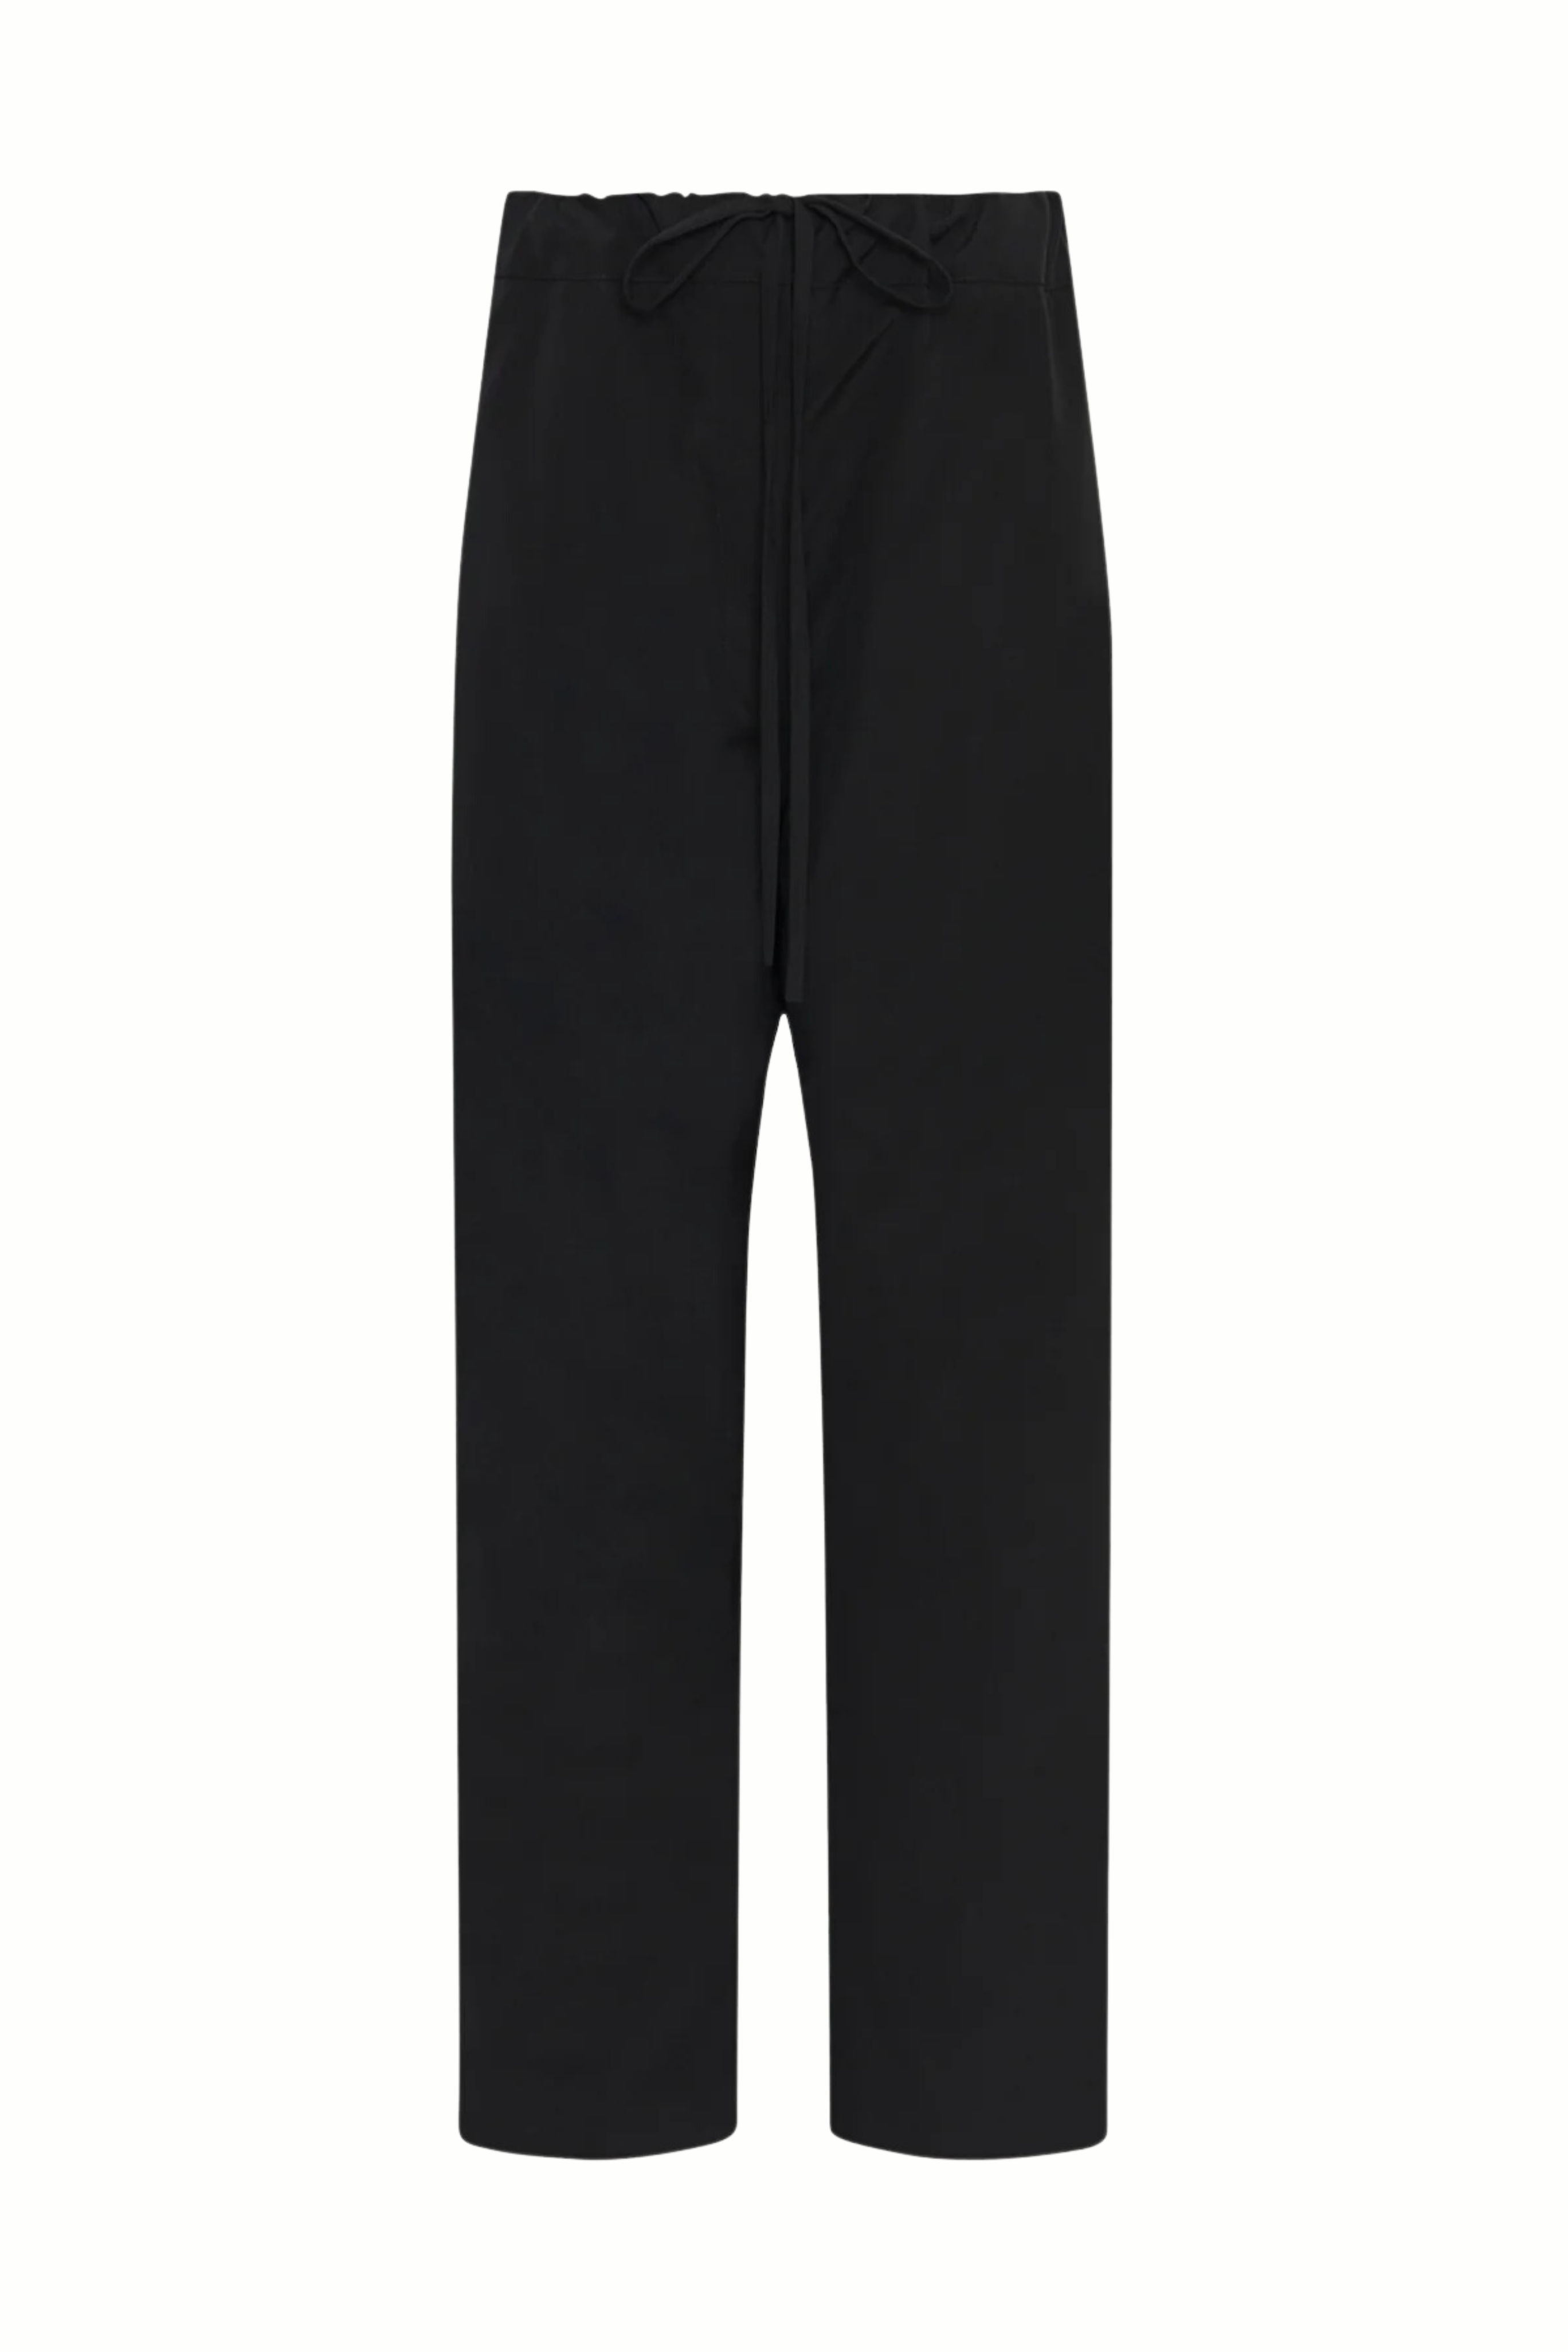 THE ROW Argent Drawstring Pants